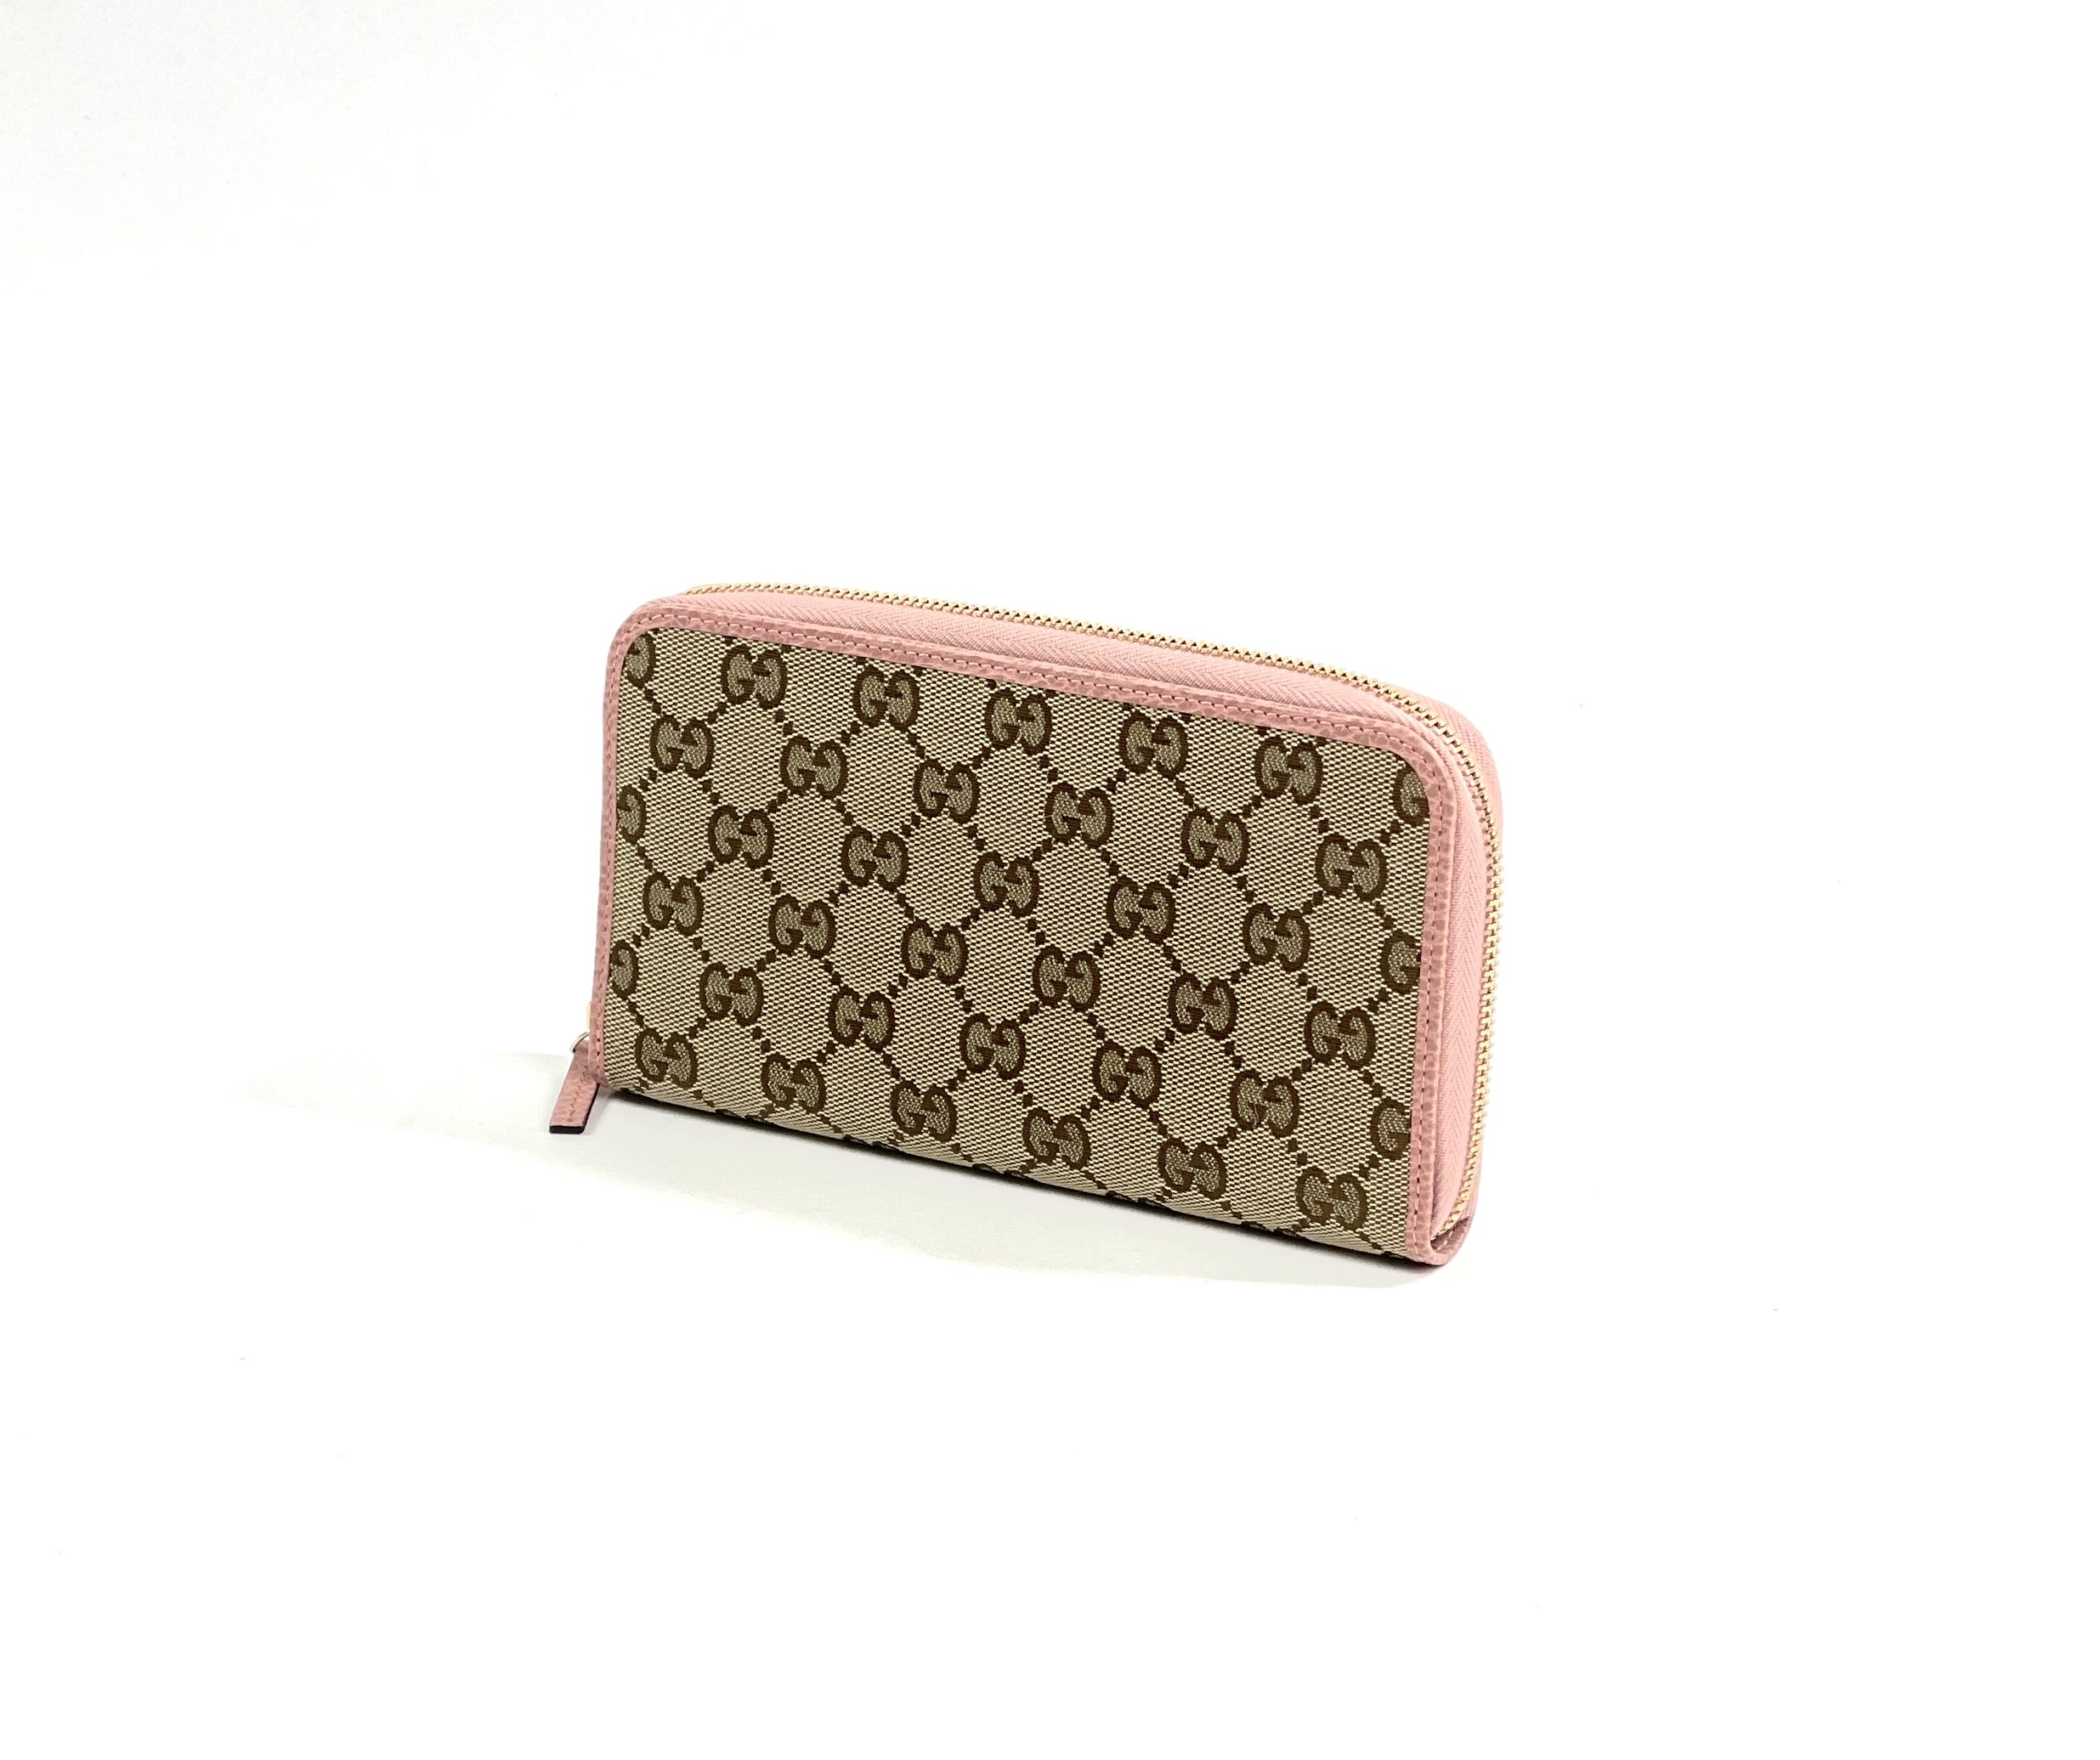 GG Marmont chain wallet in light pink leather and Supreme